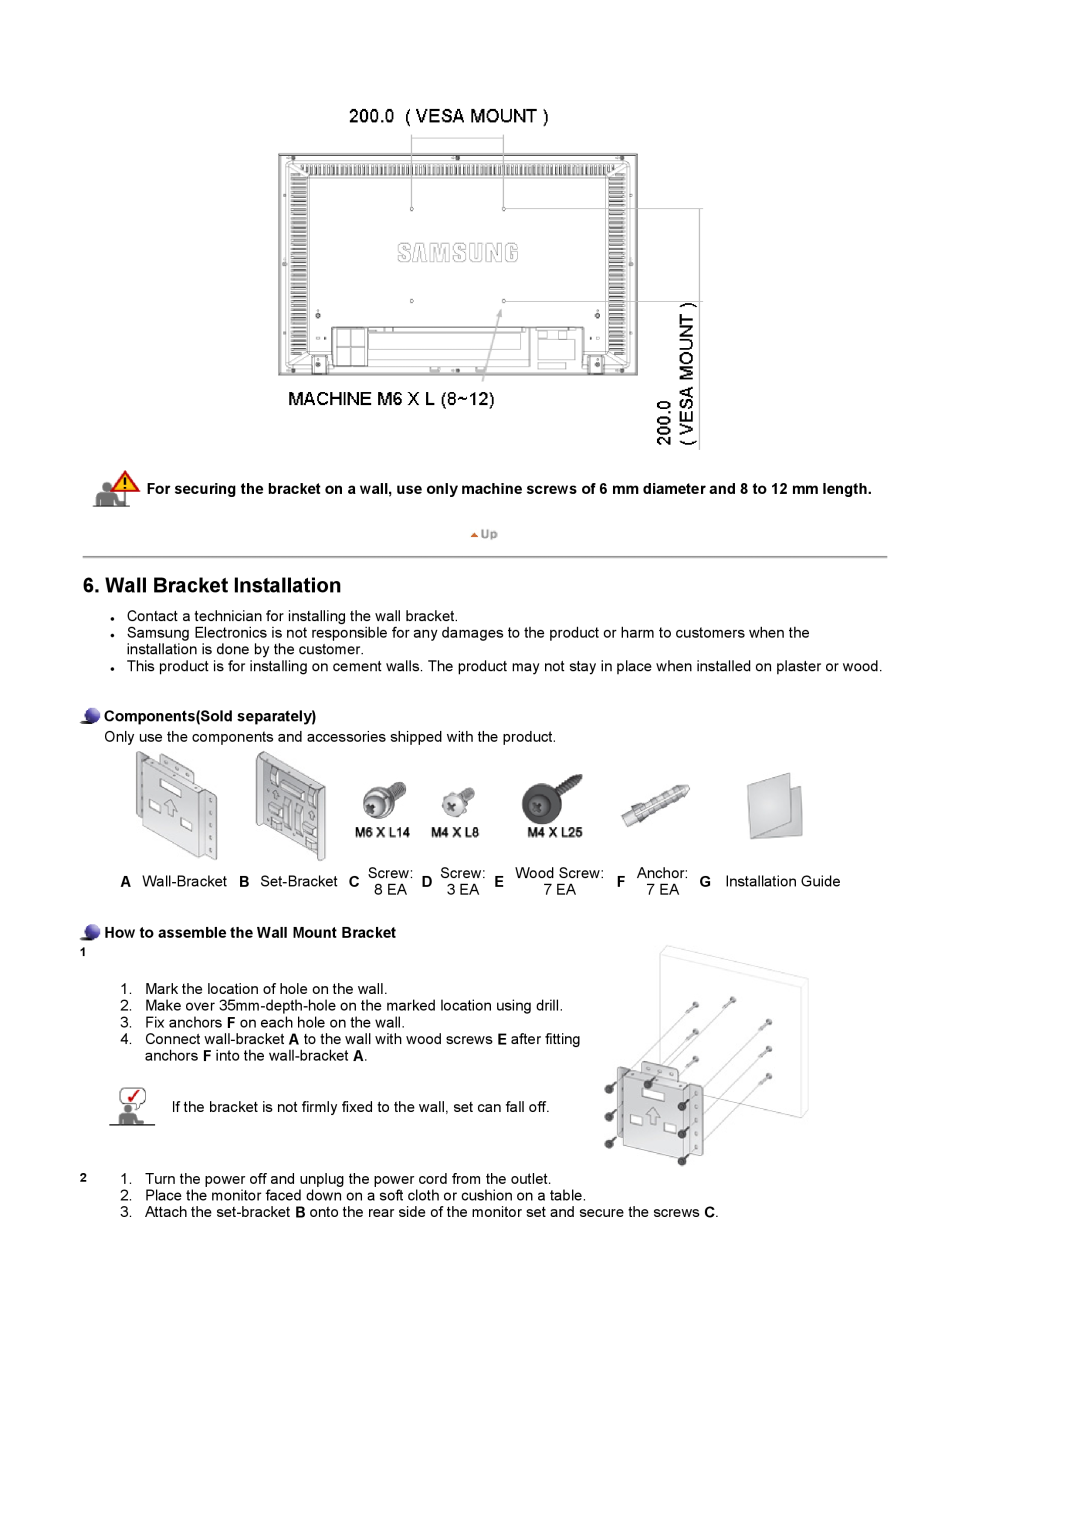 Samsung 320P manual Wall Bracket Installation, ComponentsSold separately, How to assemble the Wall Mount Bracket 